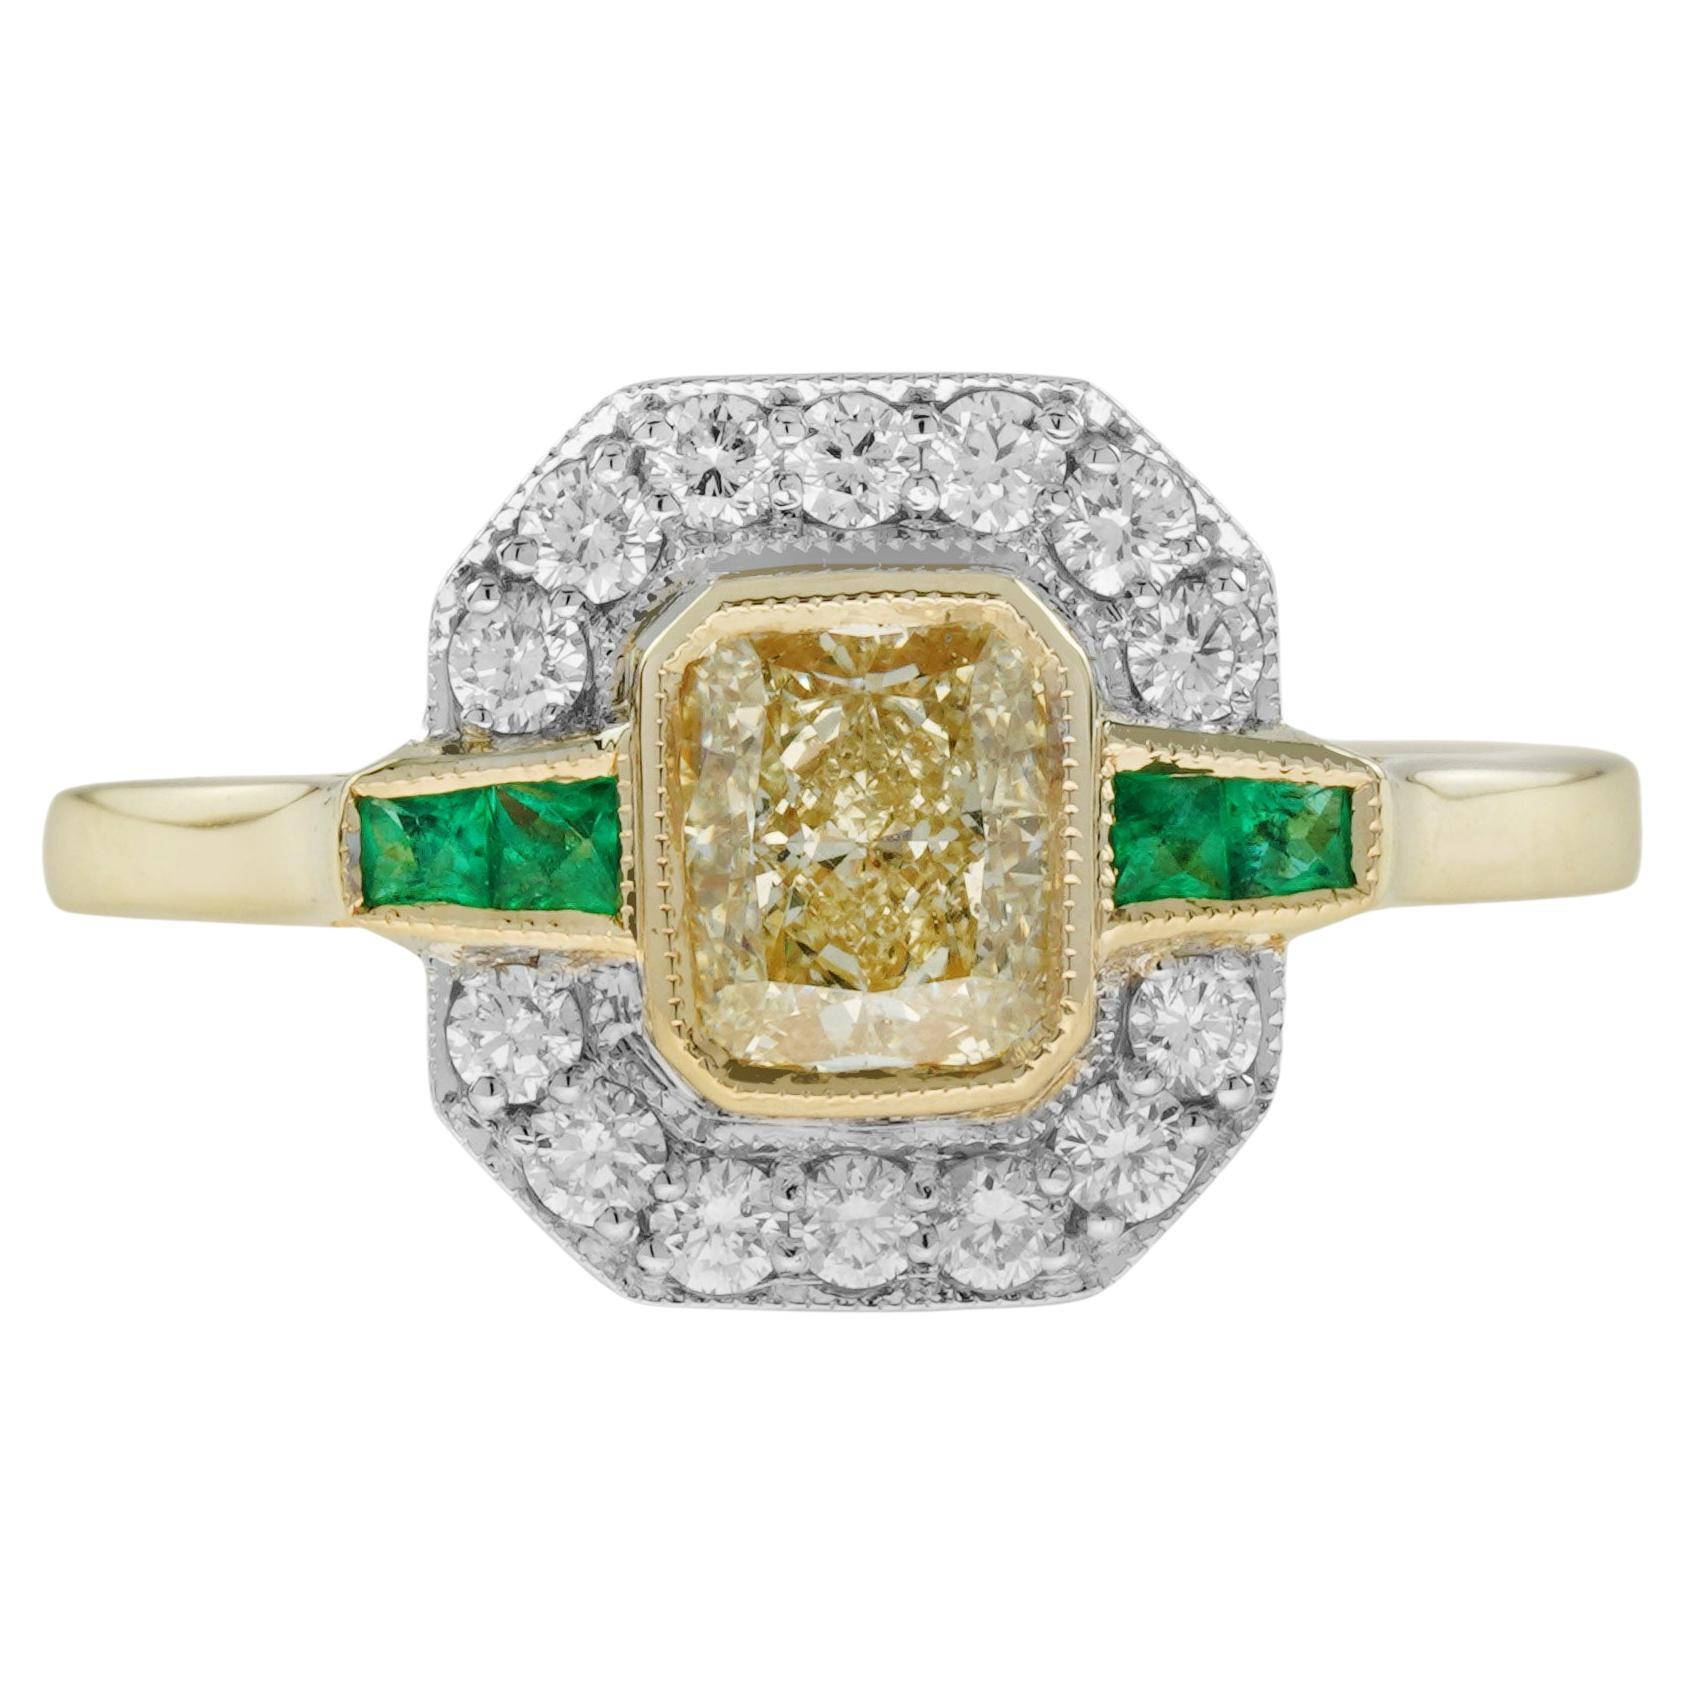 GIA Diamond and Emerald Art Deco Style Engagement Ring in 18K Yellow Gold For Sale